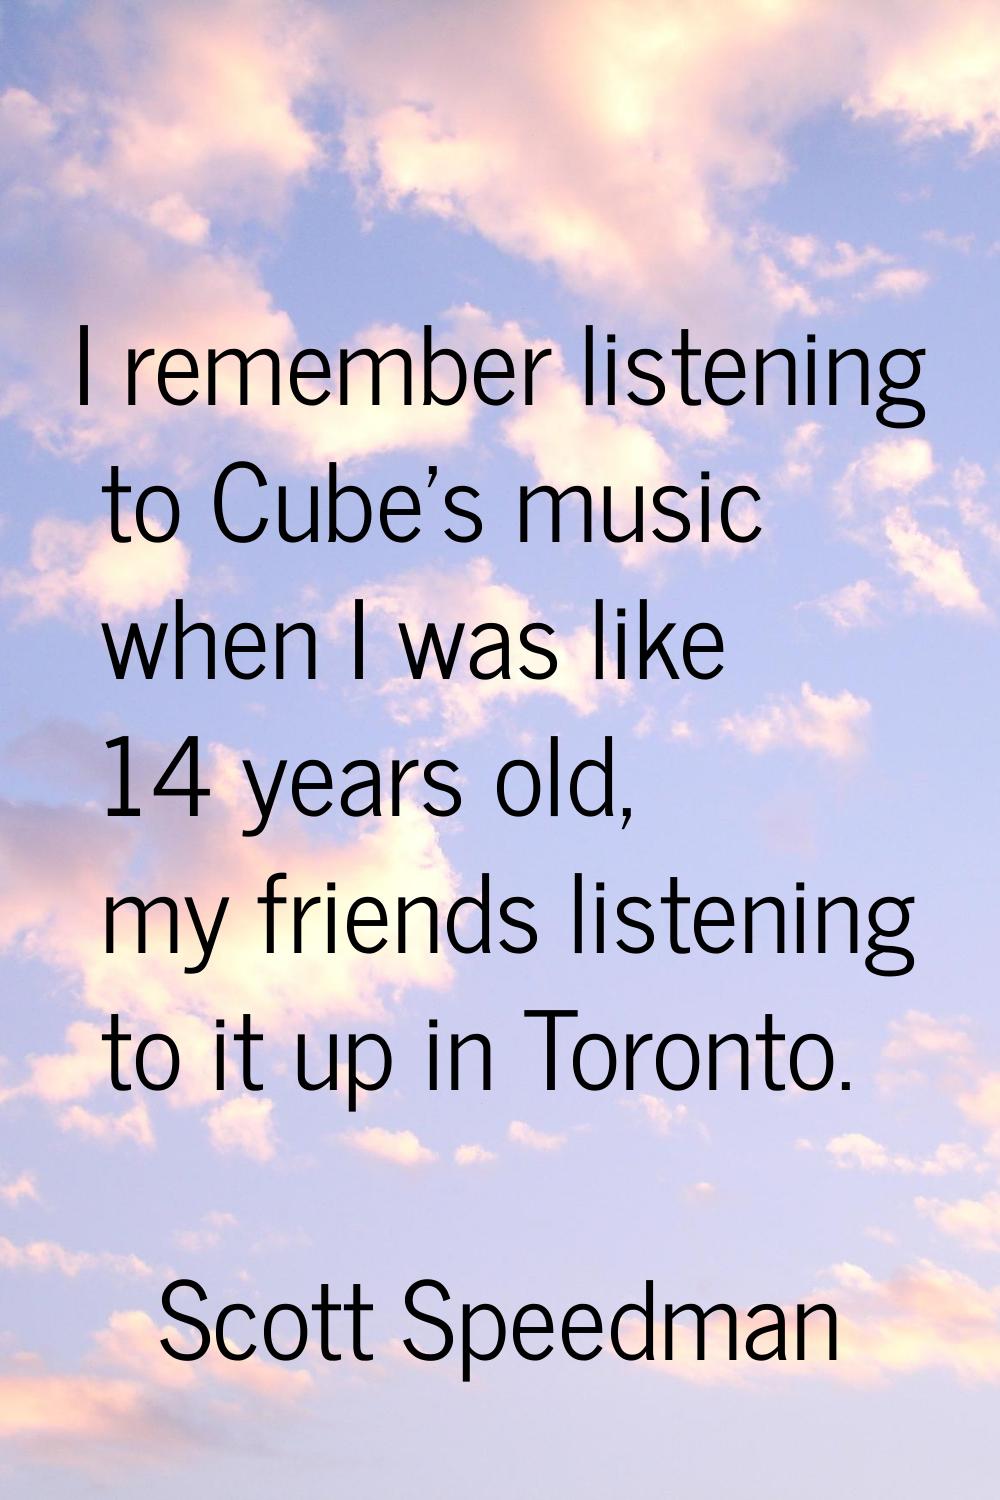 I remember listening to Cube's music when I was like 14 years old, my friends listening to it up in